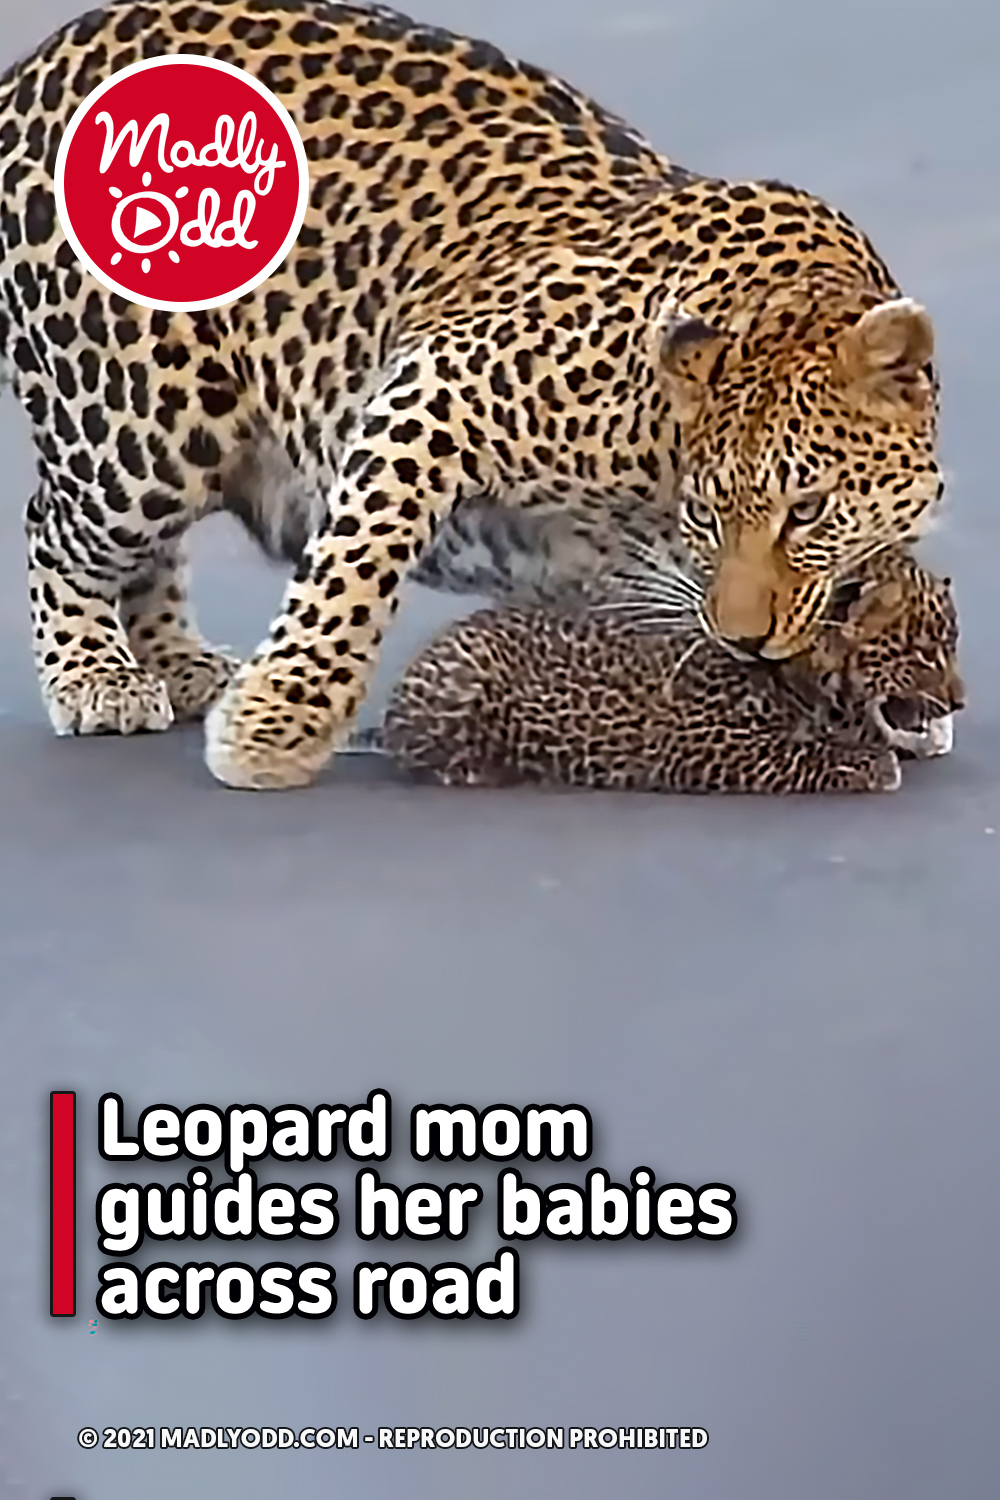 Leopard mom guides her babies across road